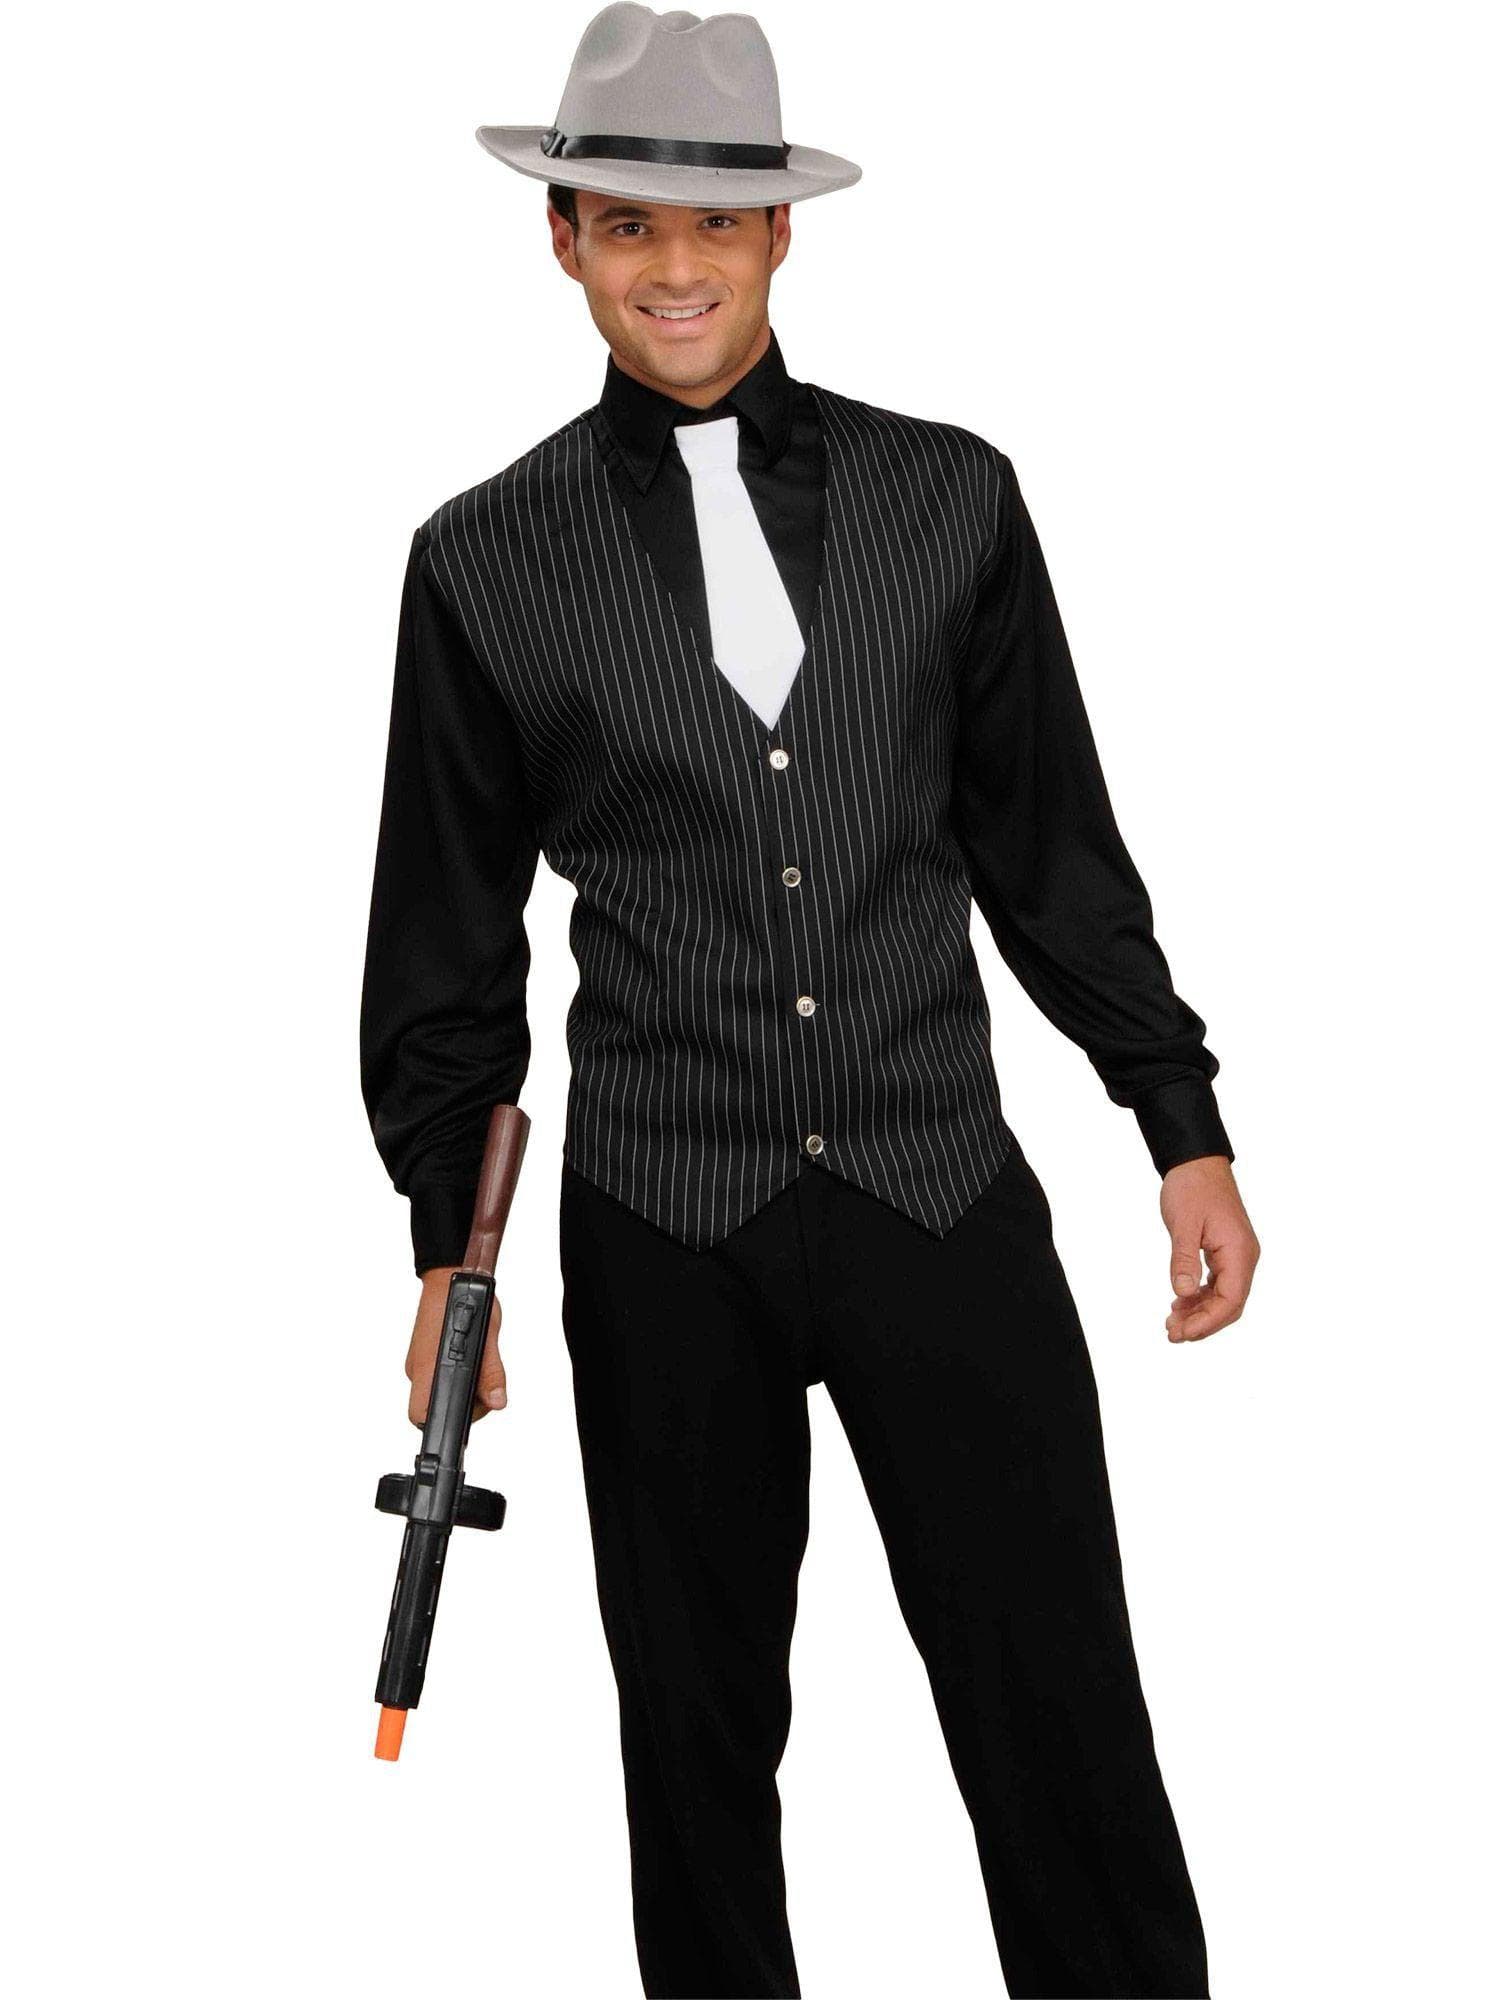 Men's Black Gangster Shirt with Vest and Tie - costumes.com